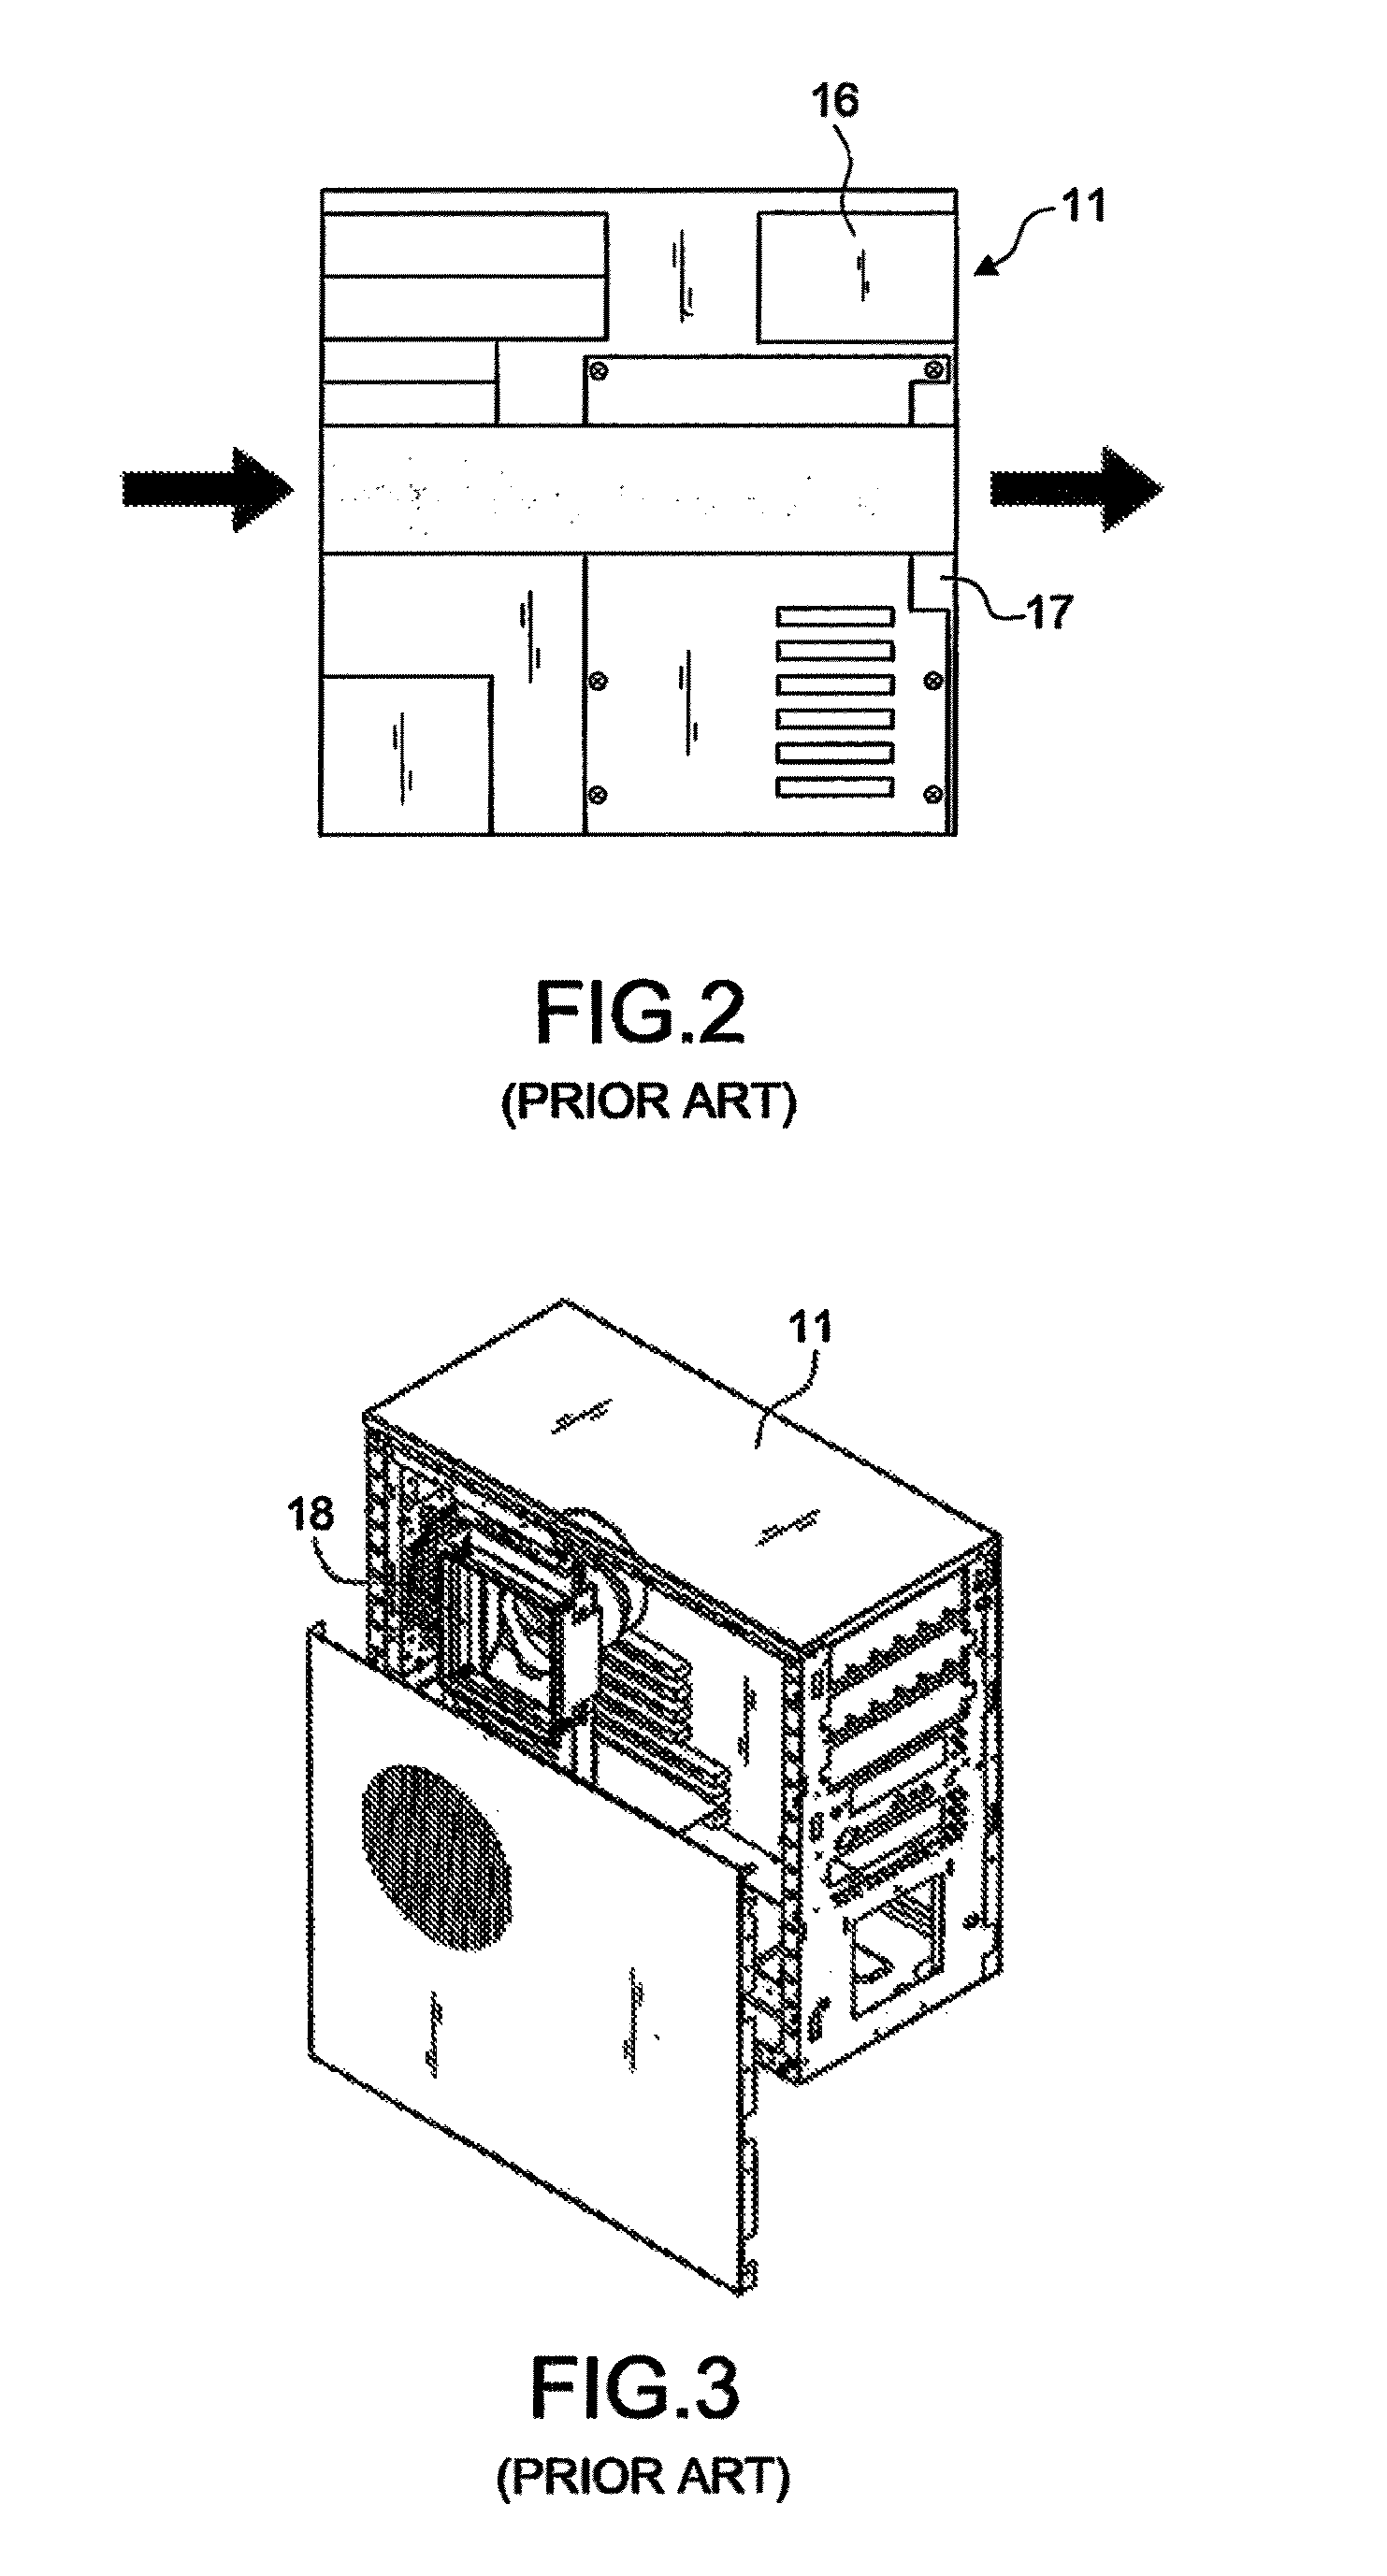 Tower computer system